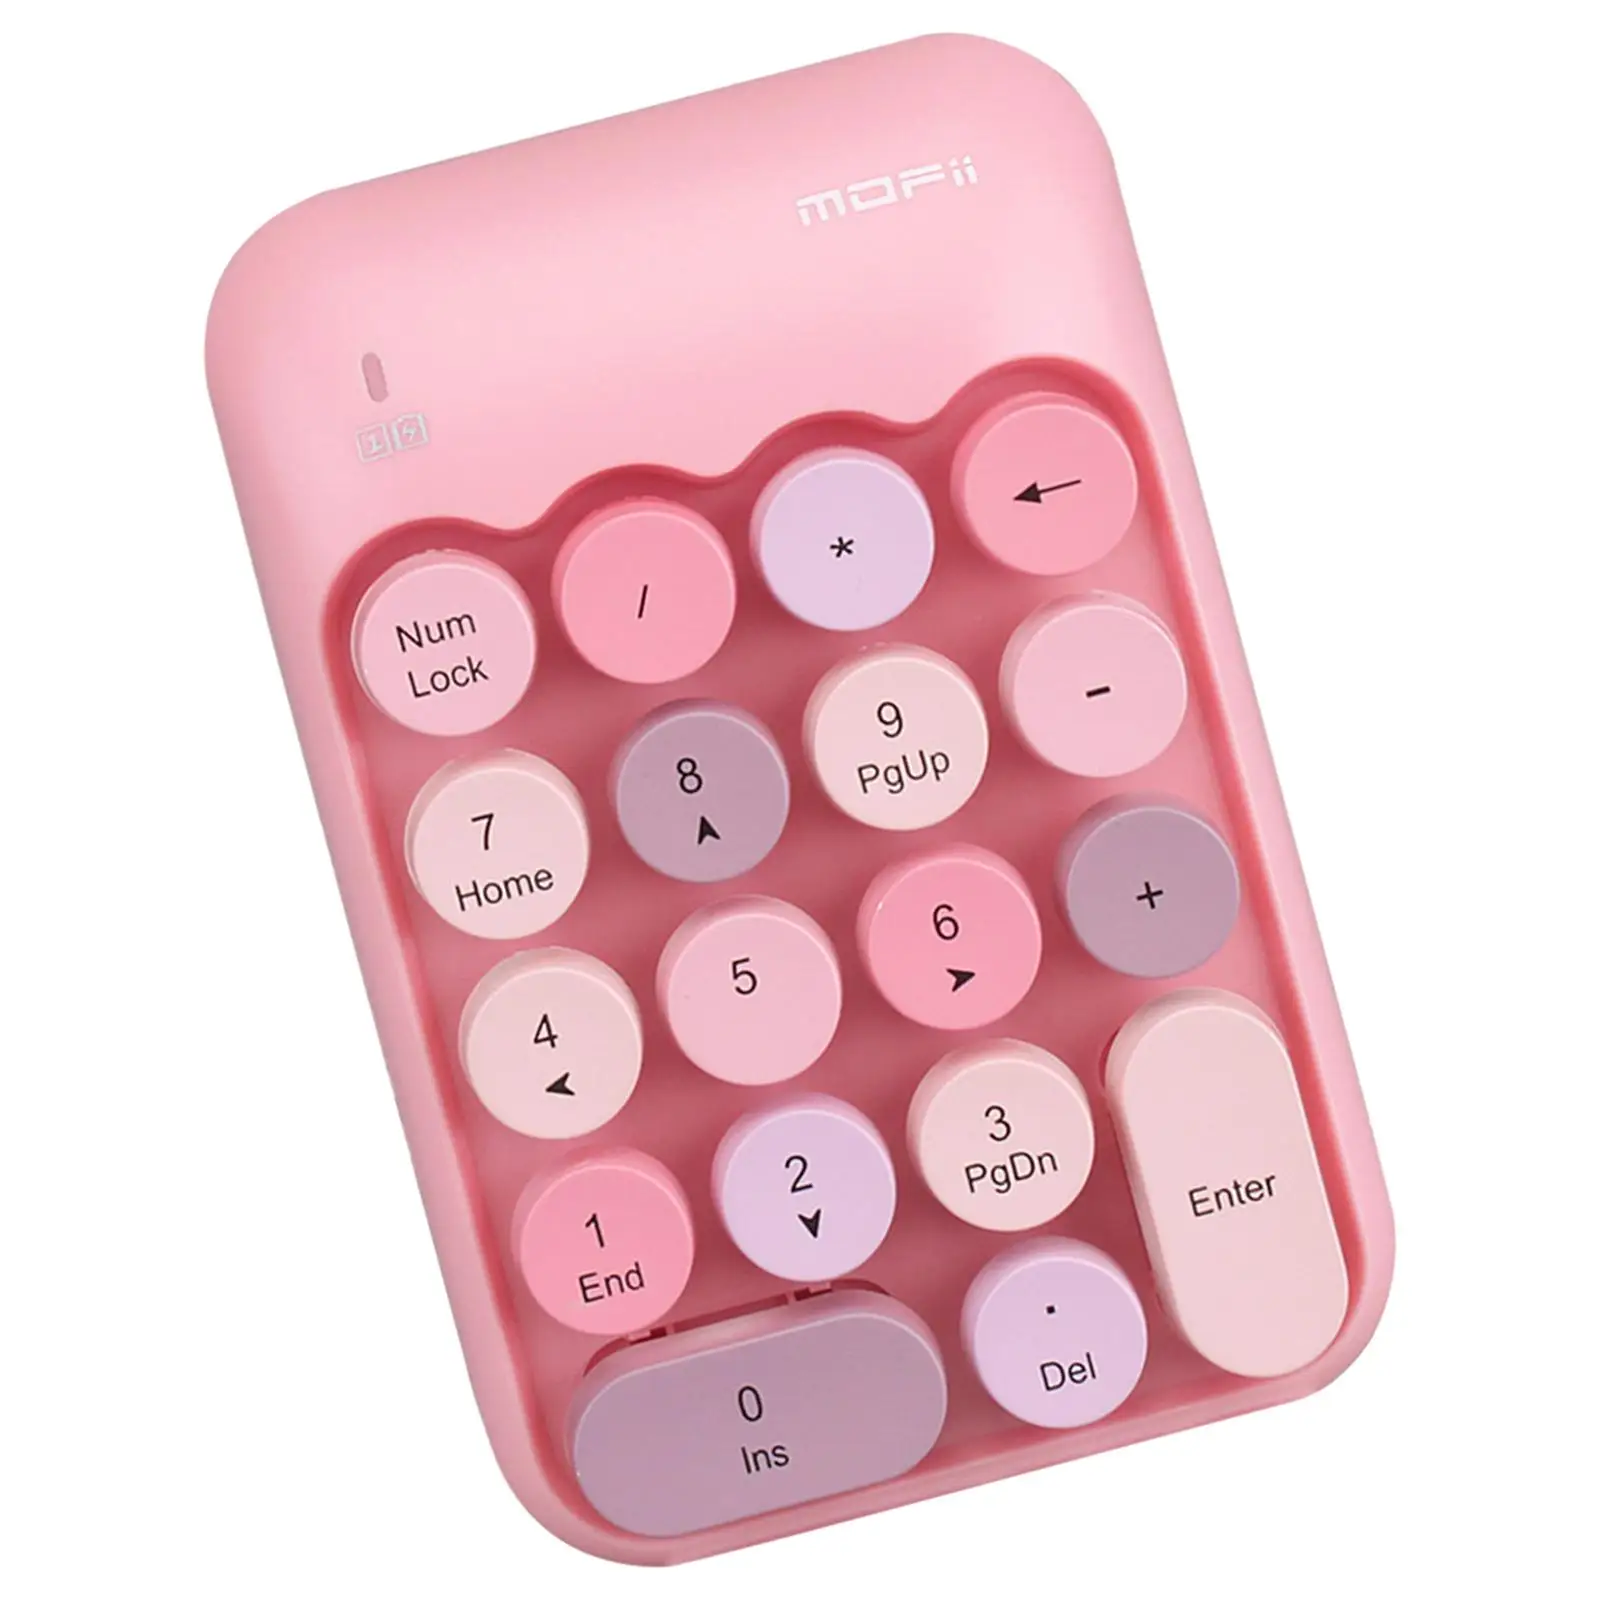 Wireless Numeric Keypad, 18 Round Key 2.4 GHz USB Financial Accounting Keyboard Extensions Number Keyboard for Desktop PC Laptop